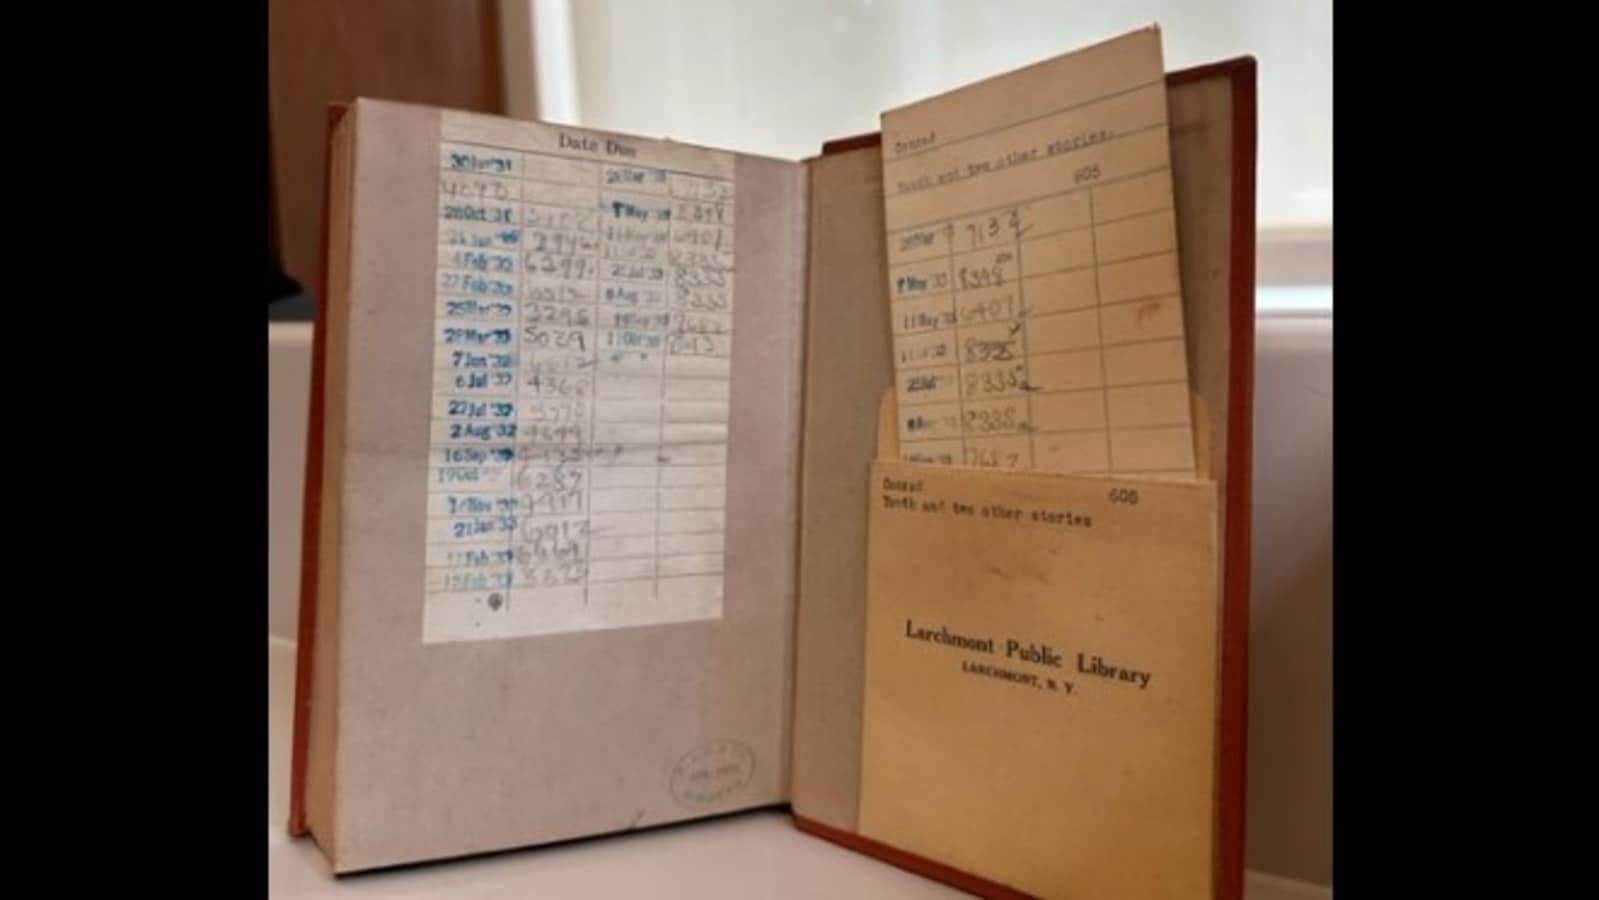 After 90 years, a book finds its way back to a New York library